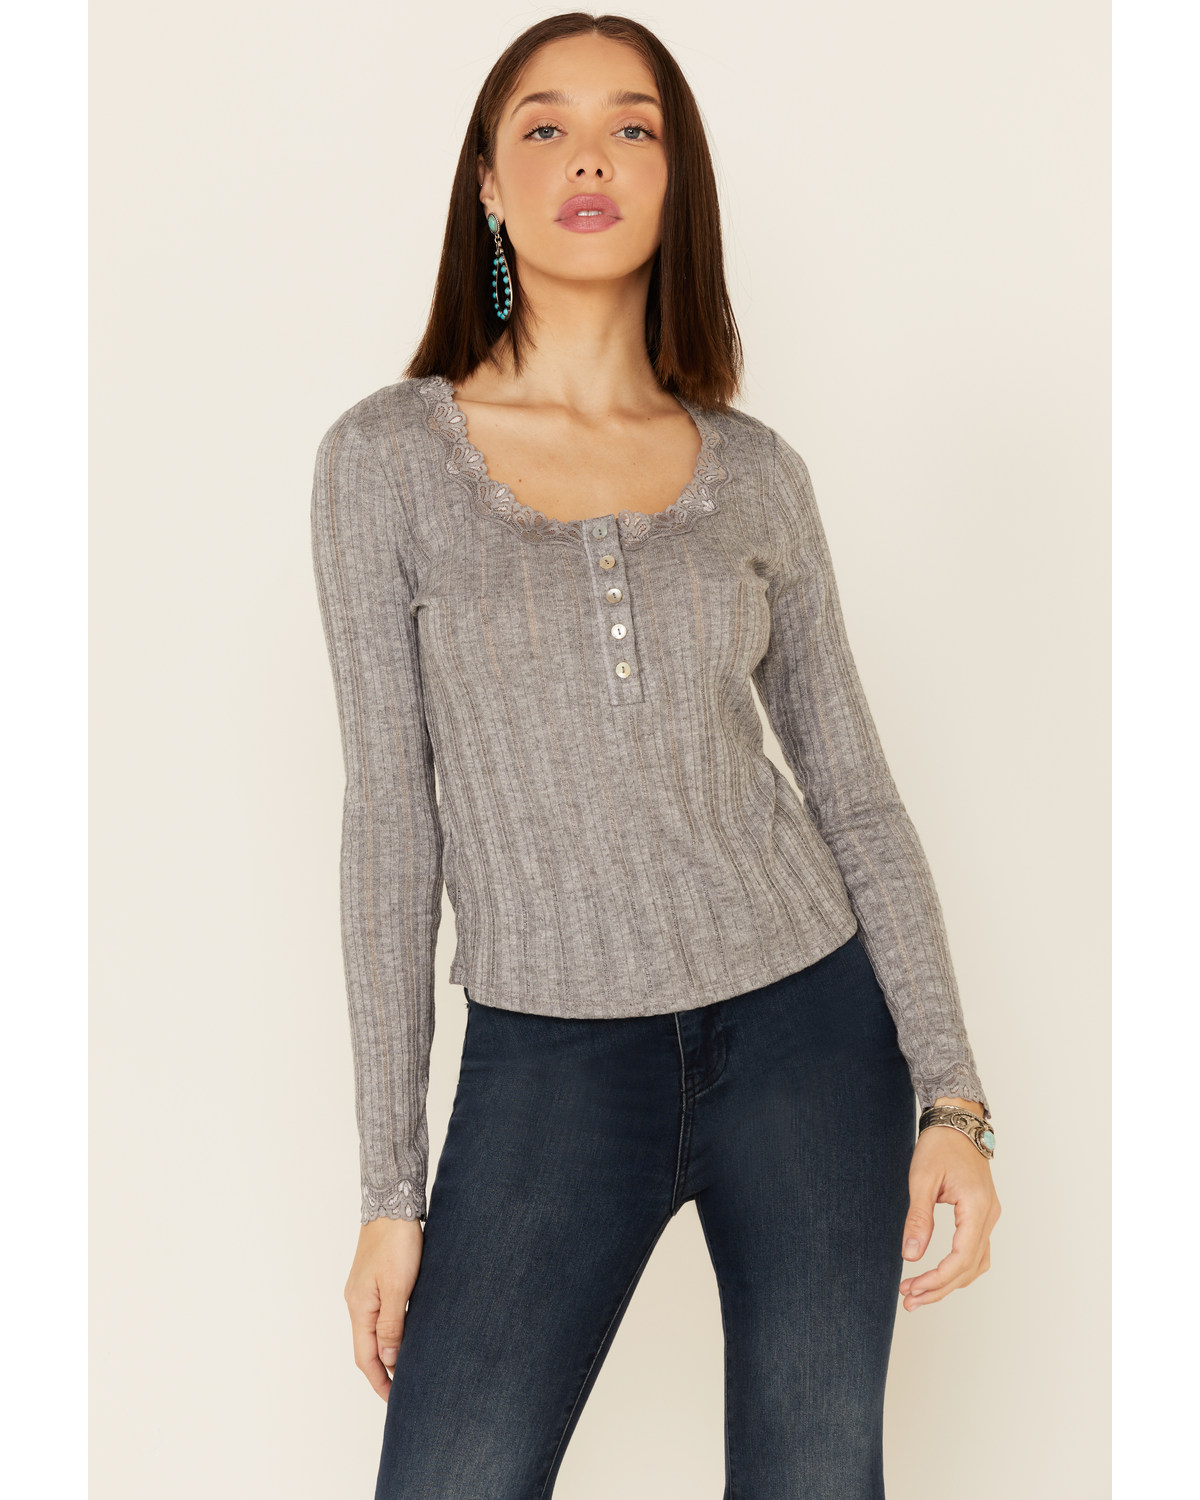 Wild Moss Women's Ribbed Knit Henley Lace Long Sleeve Top